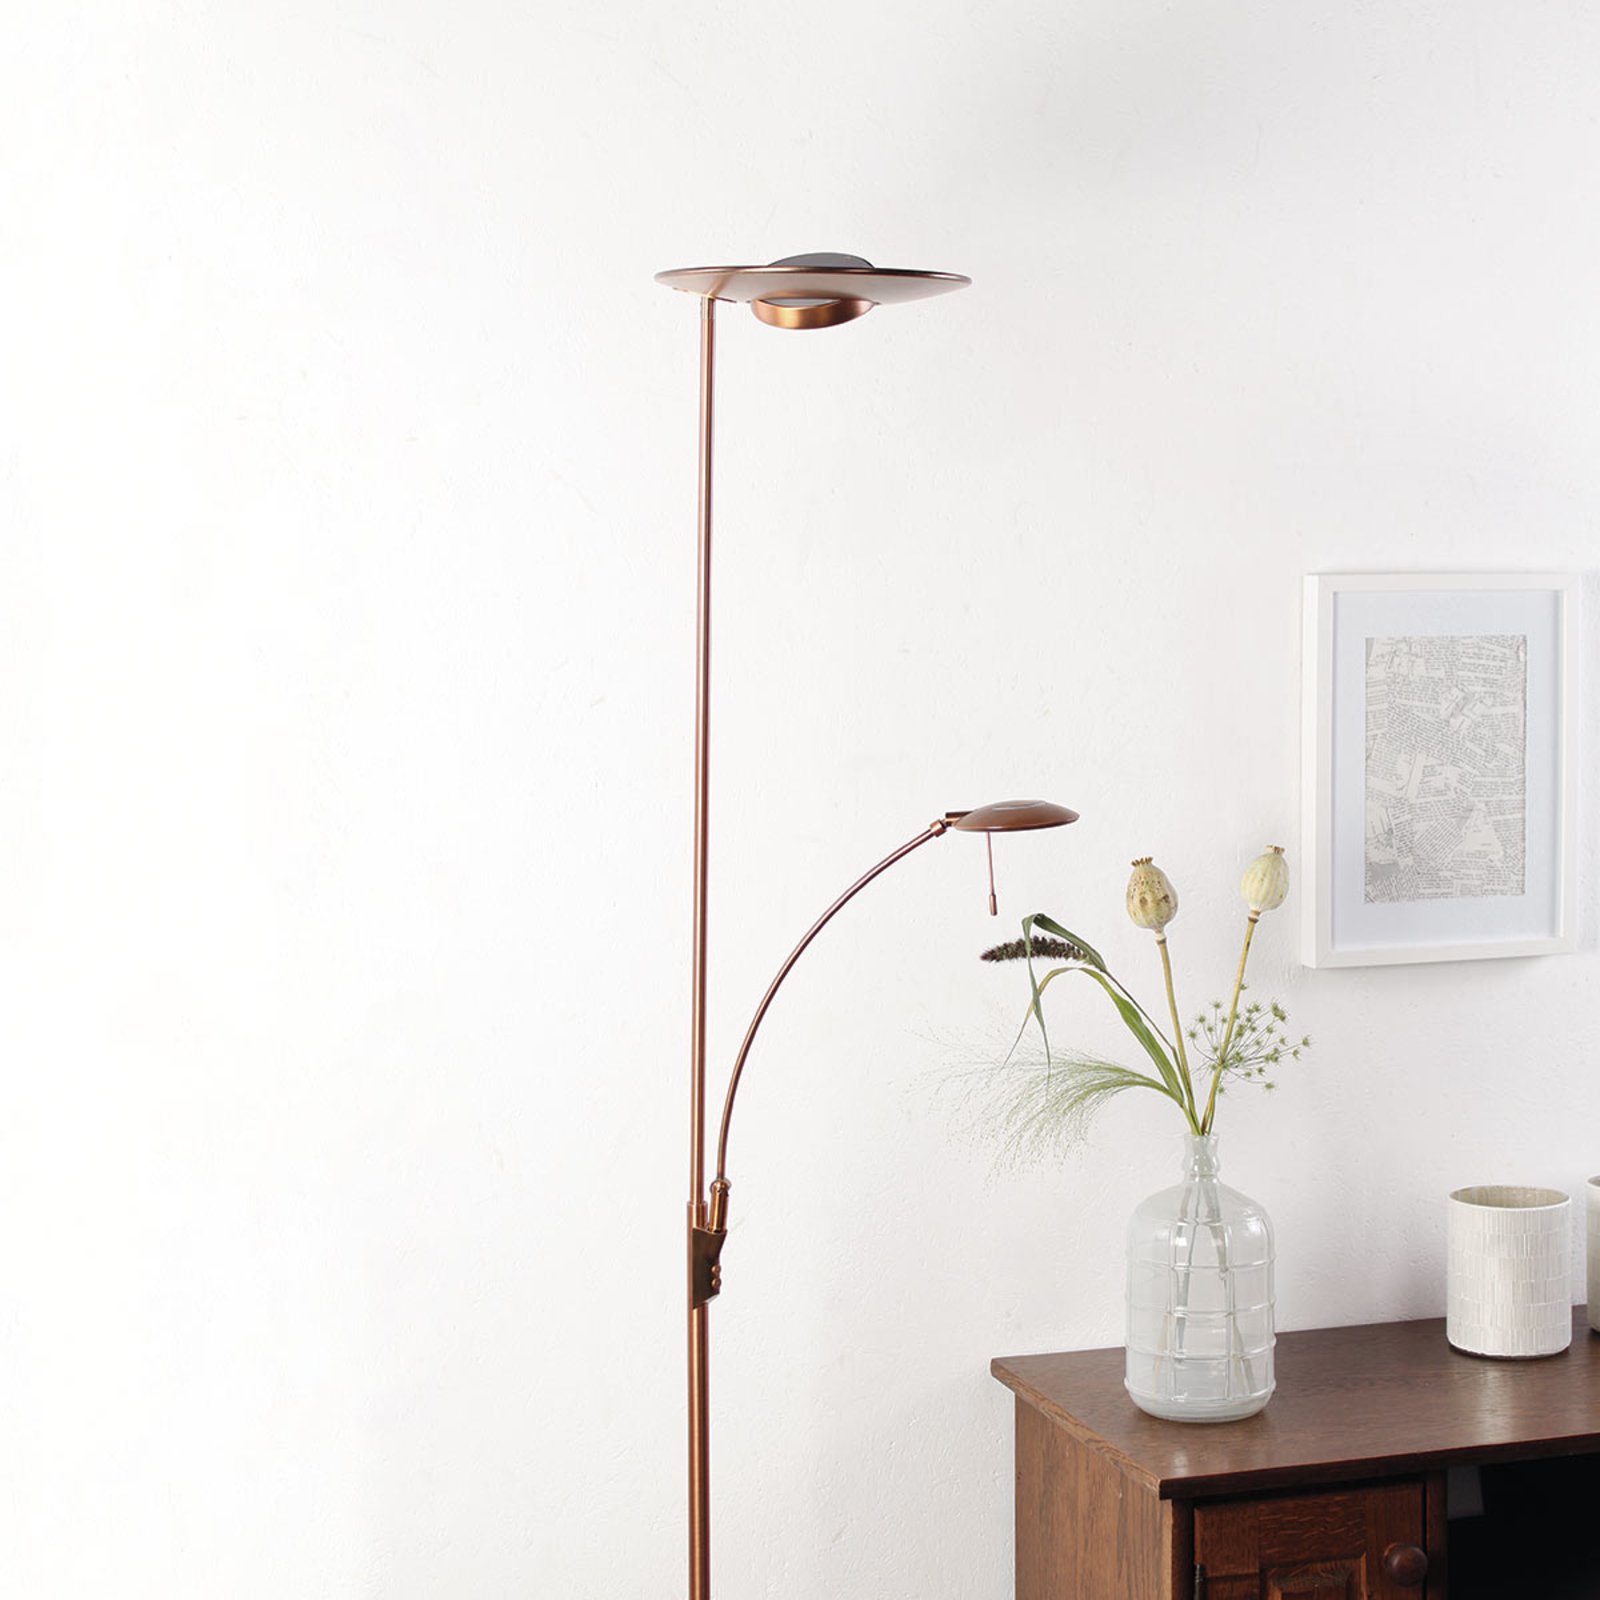 Bronze-coloured LED floor lamp Zenith with dimmer